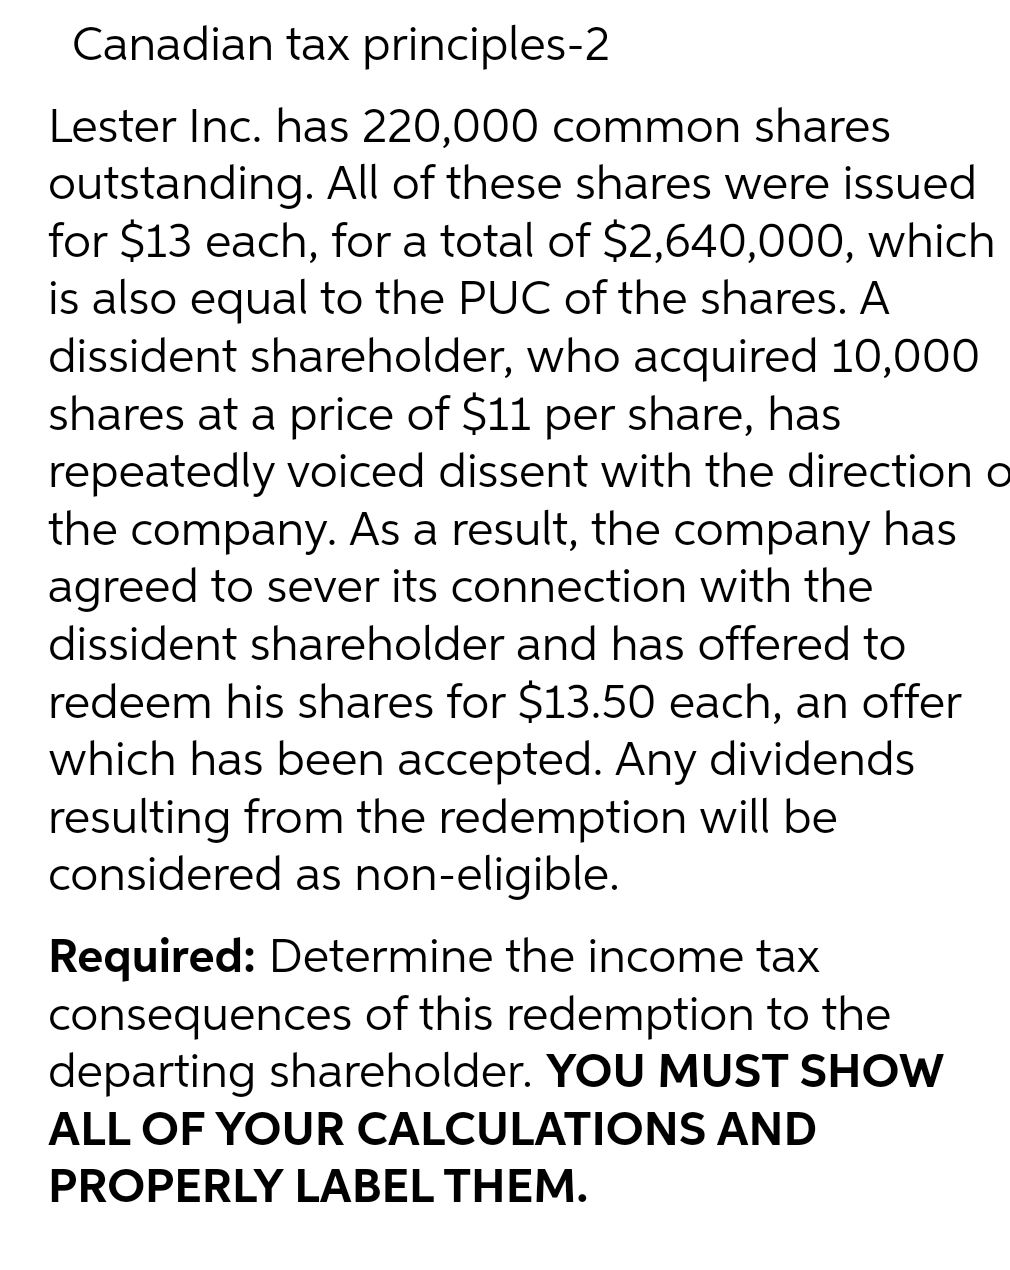 Canadian tax principles-2
Lester Inc. has 220,000 common shares
outstanding. All of these shares were issued
for $13 each, for a total of $2,640,000, which
is also equal to the PUC of the shares. A
dissident shareholder, who acquired 10,000
shares at a price of $11 per share, has
repeatedly voiced dissent with the direction o
the company. As a result, the company has
agreed to sever its connection with the
dissident shareholder and has offered to
redeem his shares for $13.50 each, an offer
which has been accepted. Any dividends
resulting from the redemption will be
considered as non-eligible.
Required: Determine the income tax
consequences of this redemption to the
departing shareholder. YOU MUST SHOW
ALL OF YOUR CALCULATIONS AND
PROPERLY LABEL THEM.
